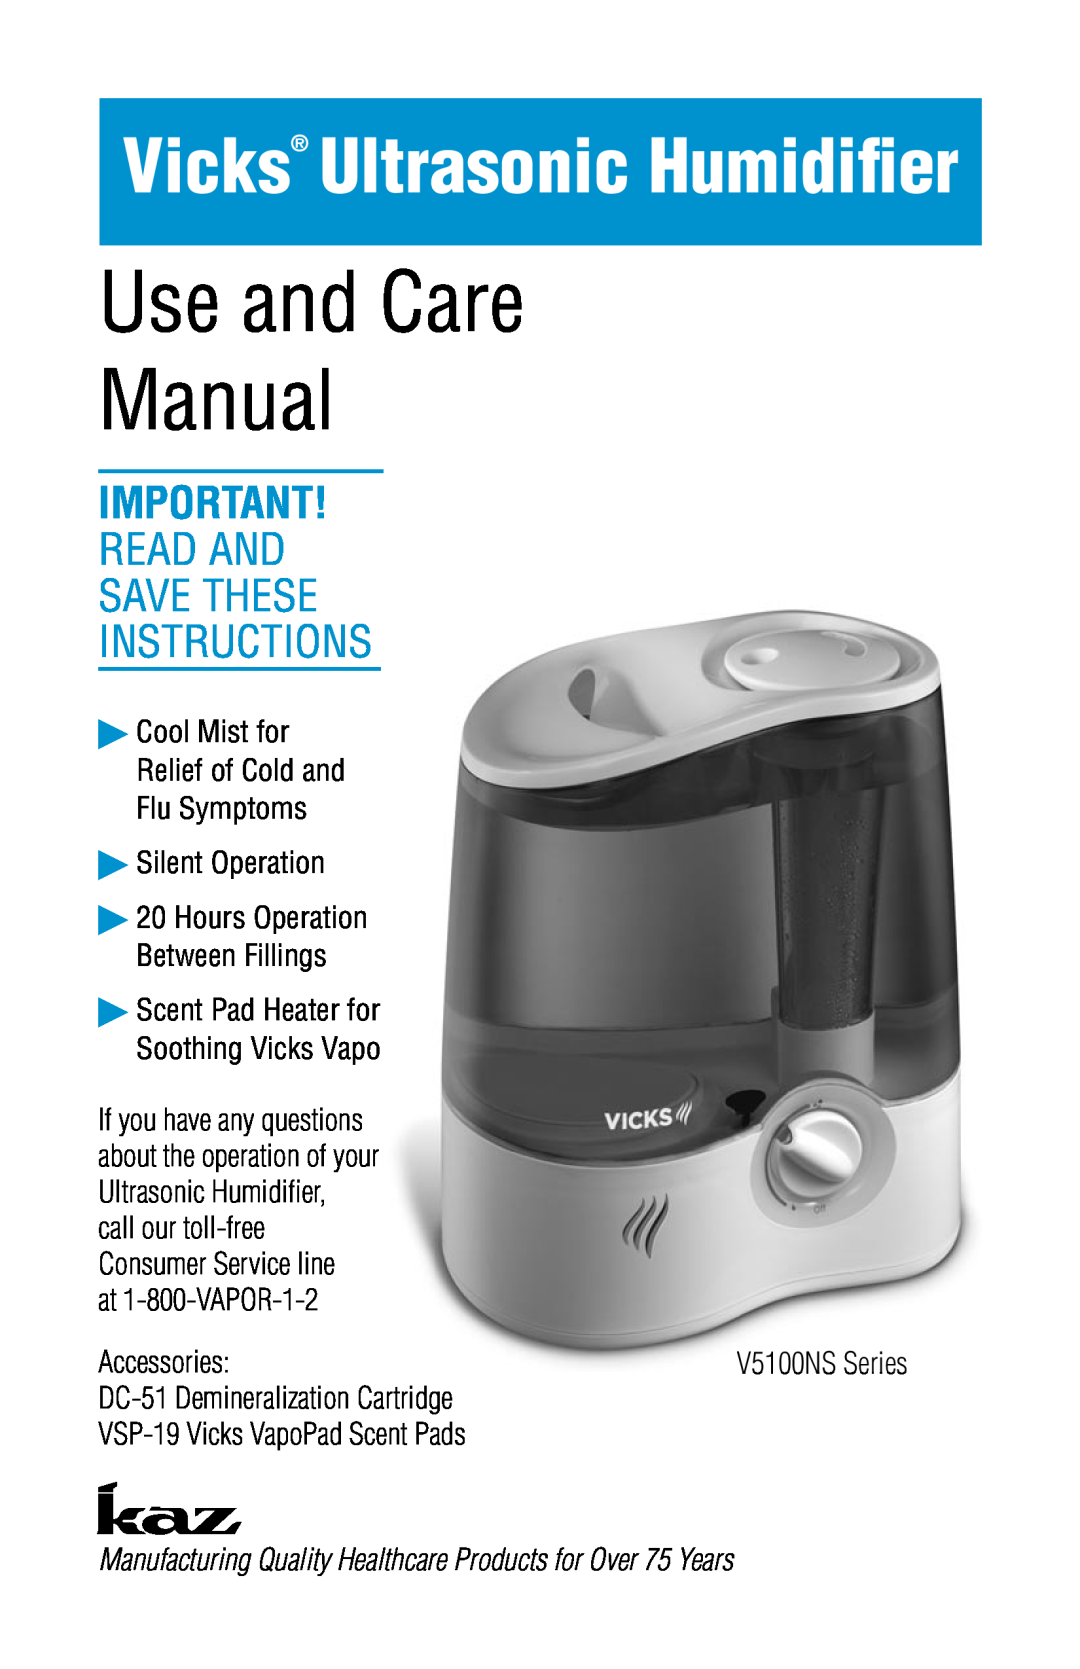 Honeywell V5100NS manual Use and Care Manual, Vicks Ultrasonic Humidifier, Read And Save These Instructions 